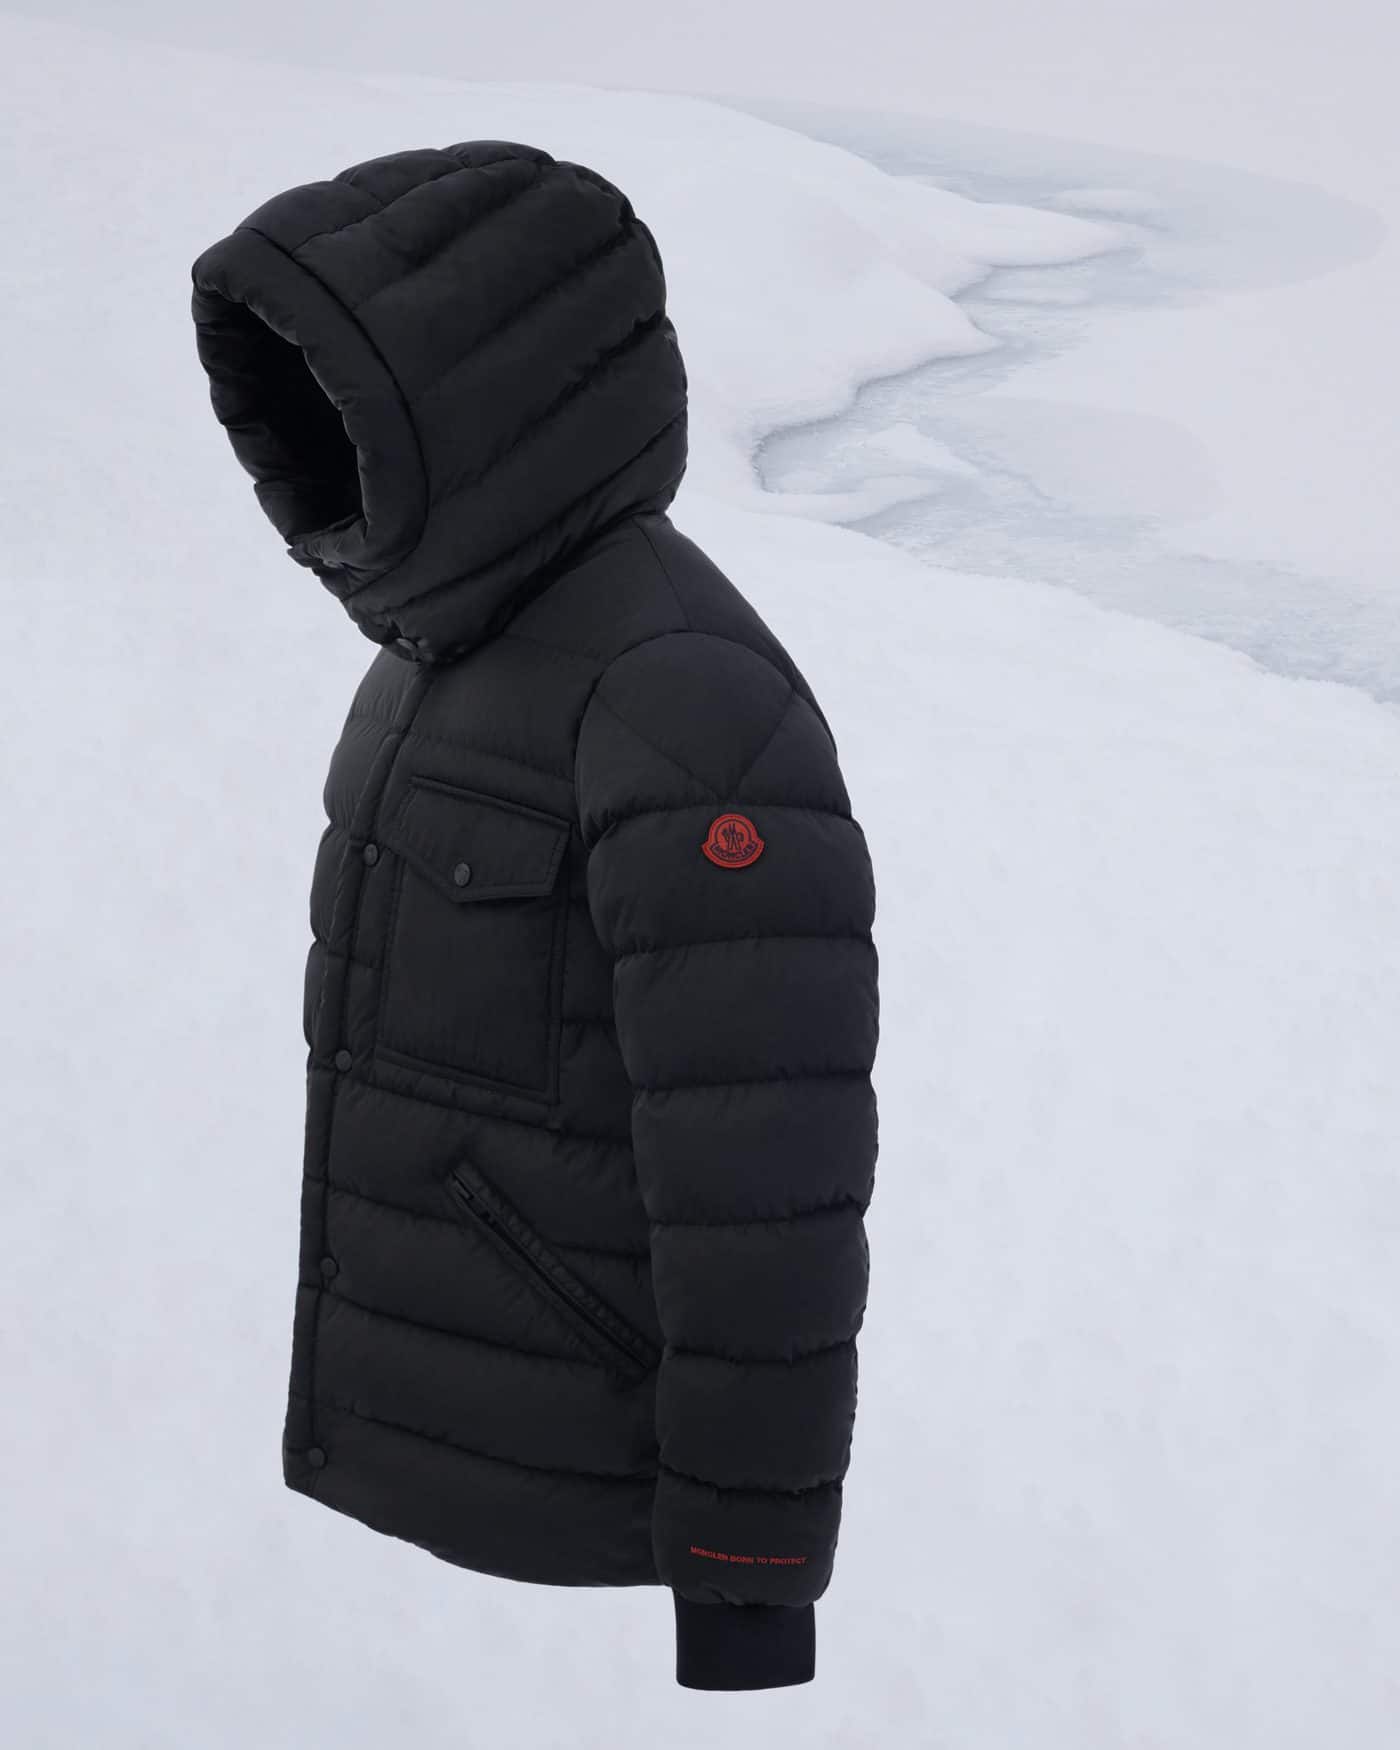 Moncler's New Sustainable Jacket Line Has Arrived - Daily Front Row